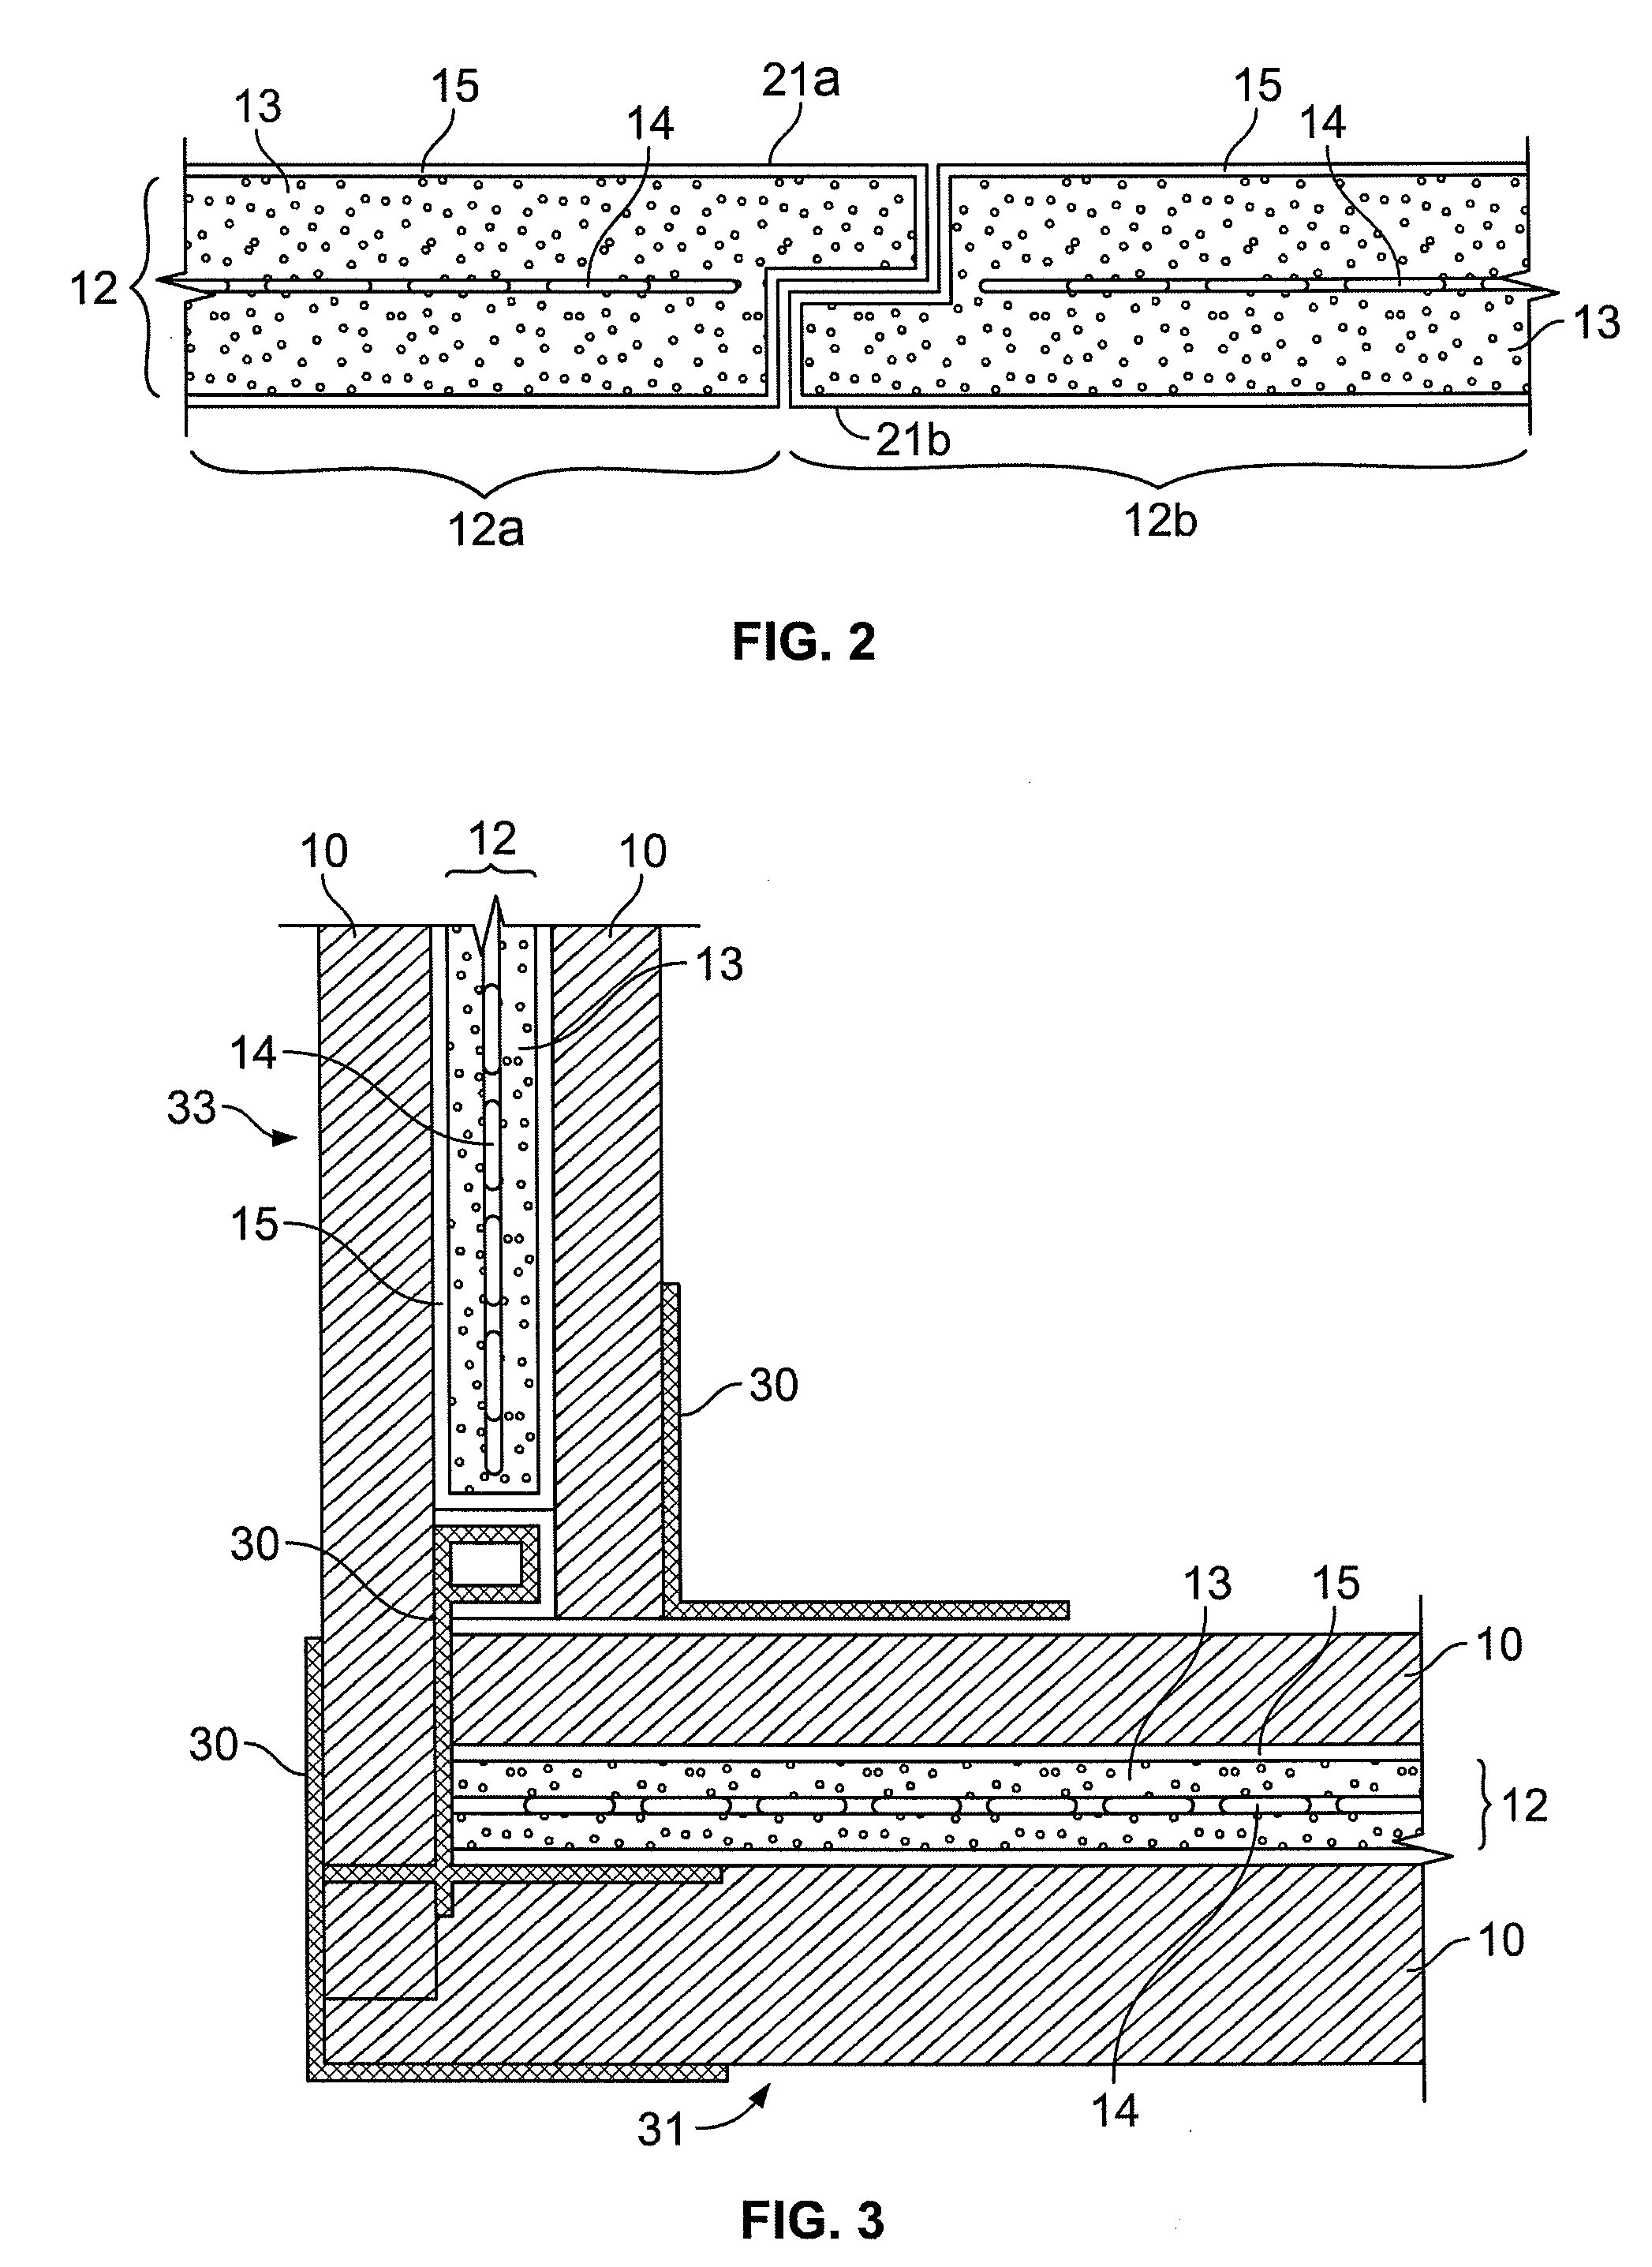 Insulated Composite Body Panel Structure for a Refrigerated Truck Body